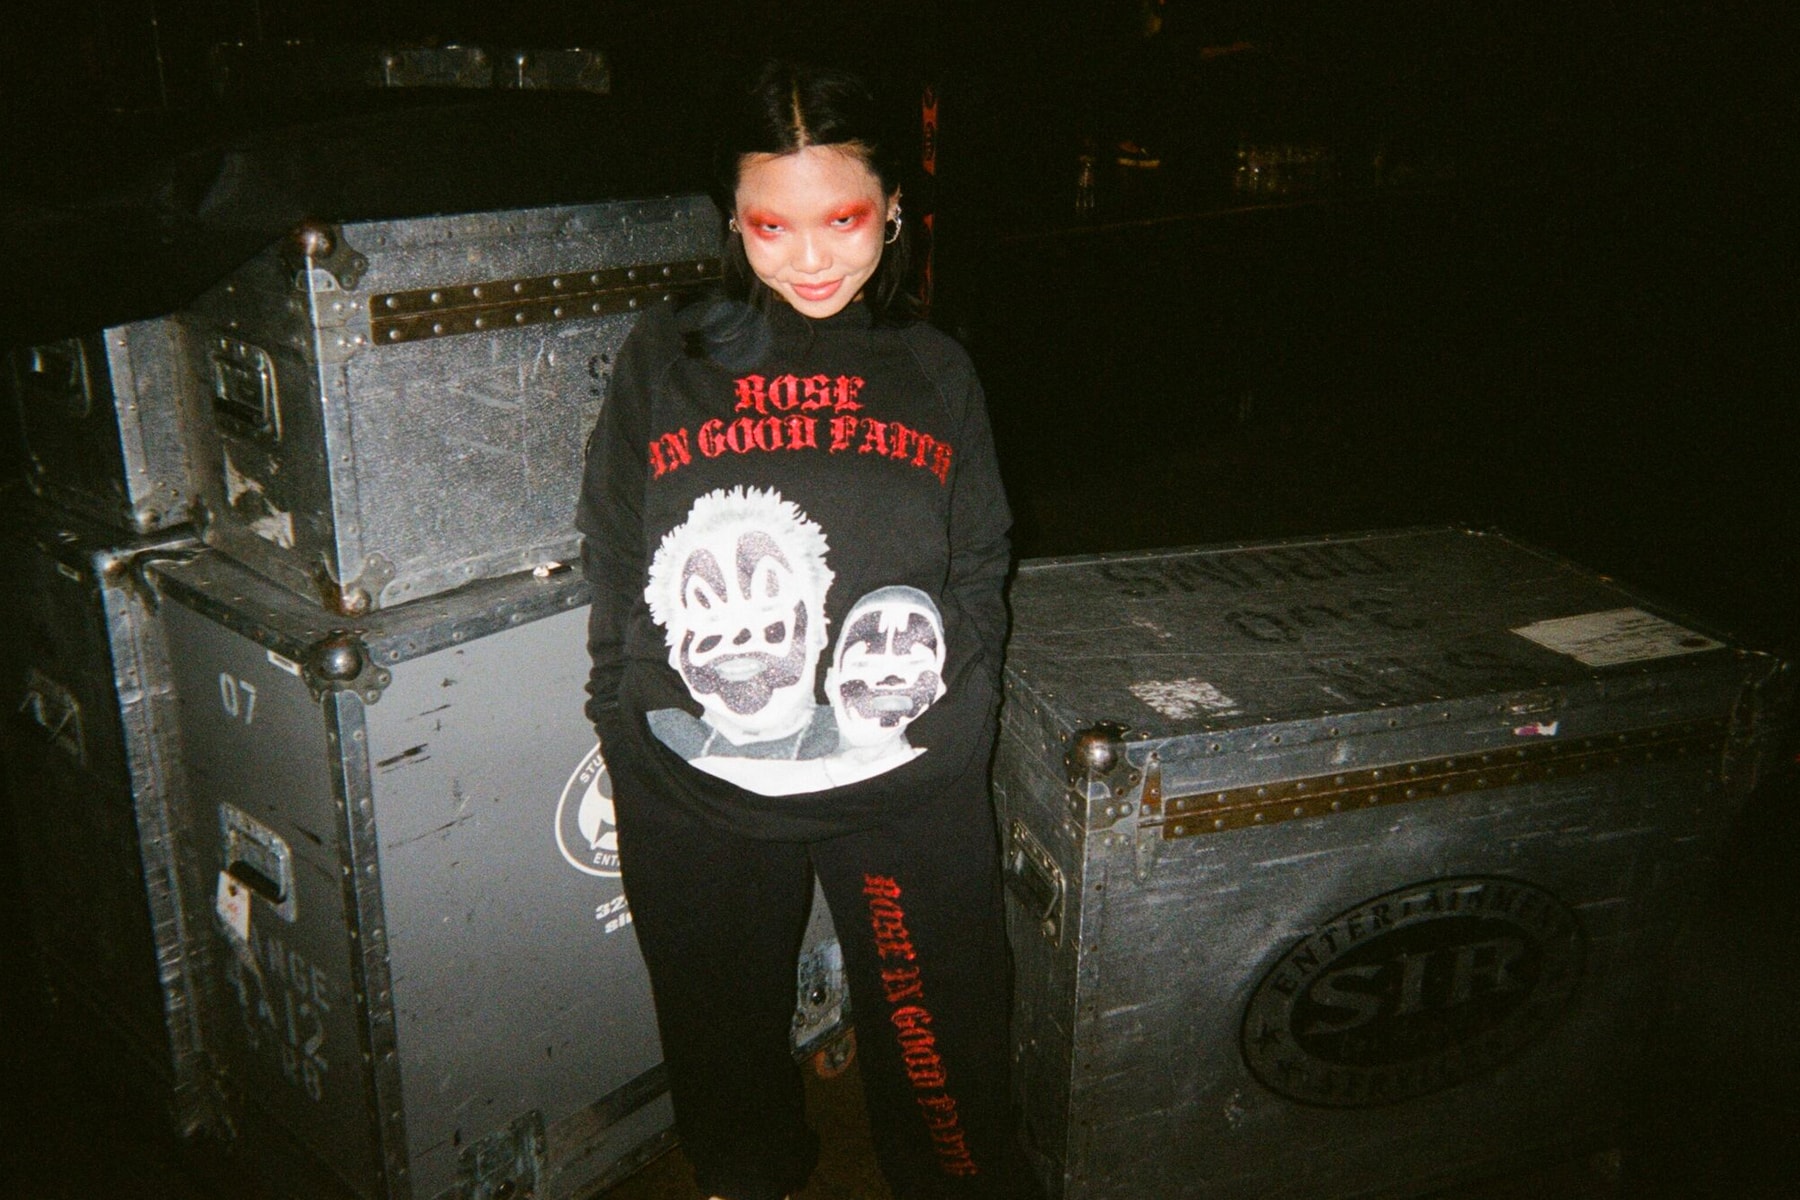 ROSE IN GOOD FAITH Ultra-Violence Collection Lookbook release info